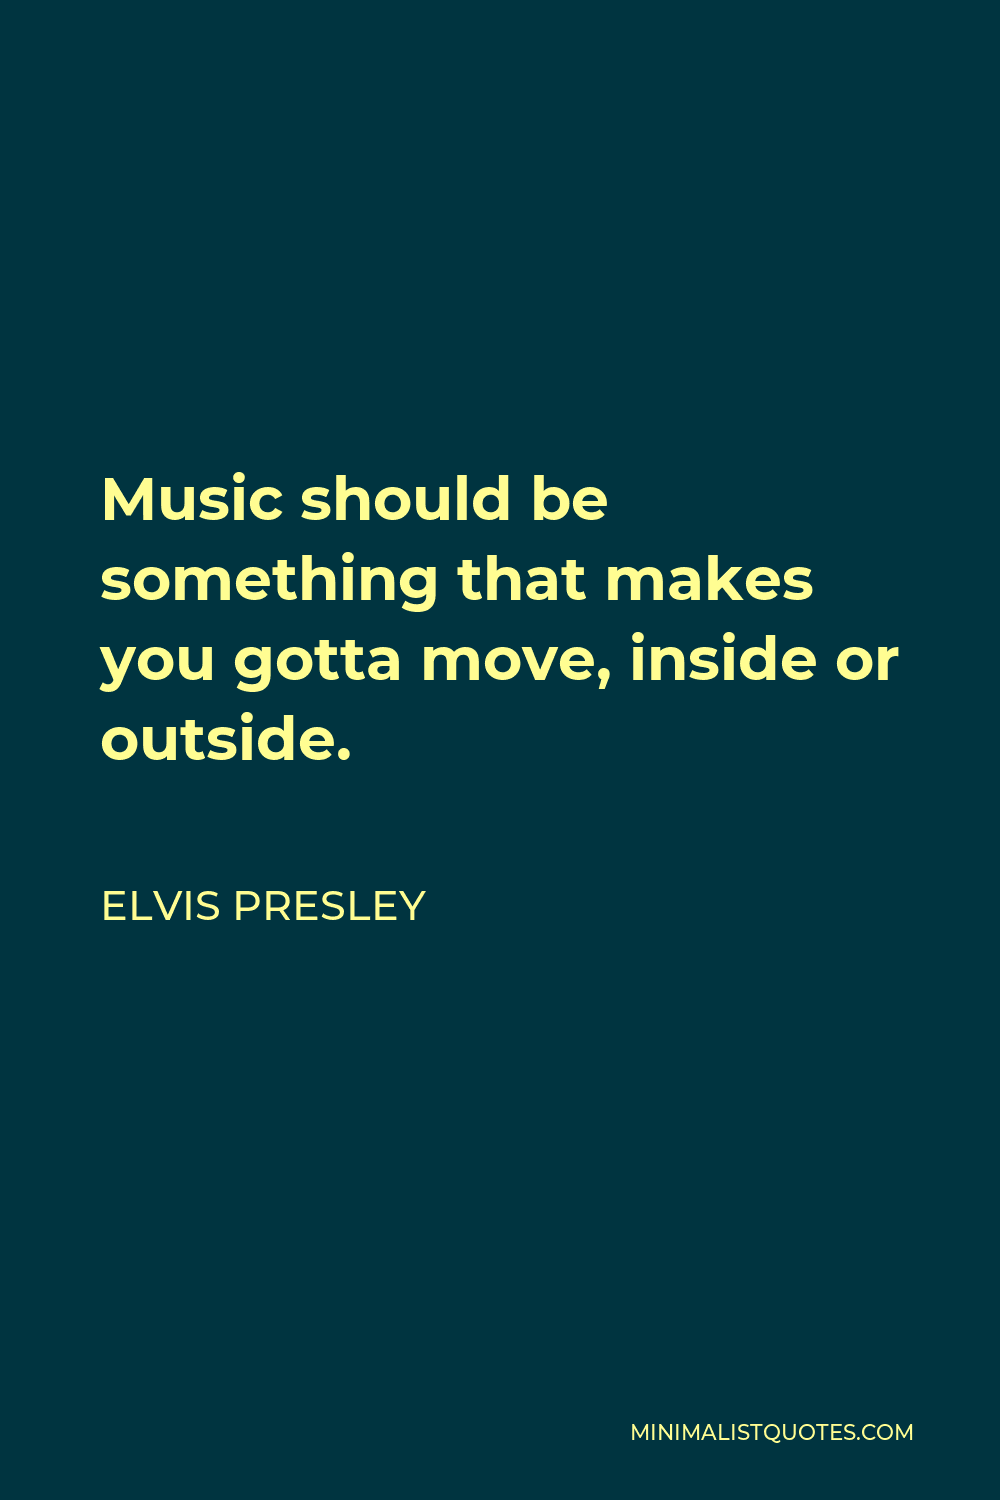 Elvis Presley Quote - Music should be something that makes you gotta move, inside or outside.